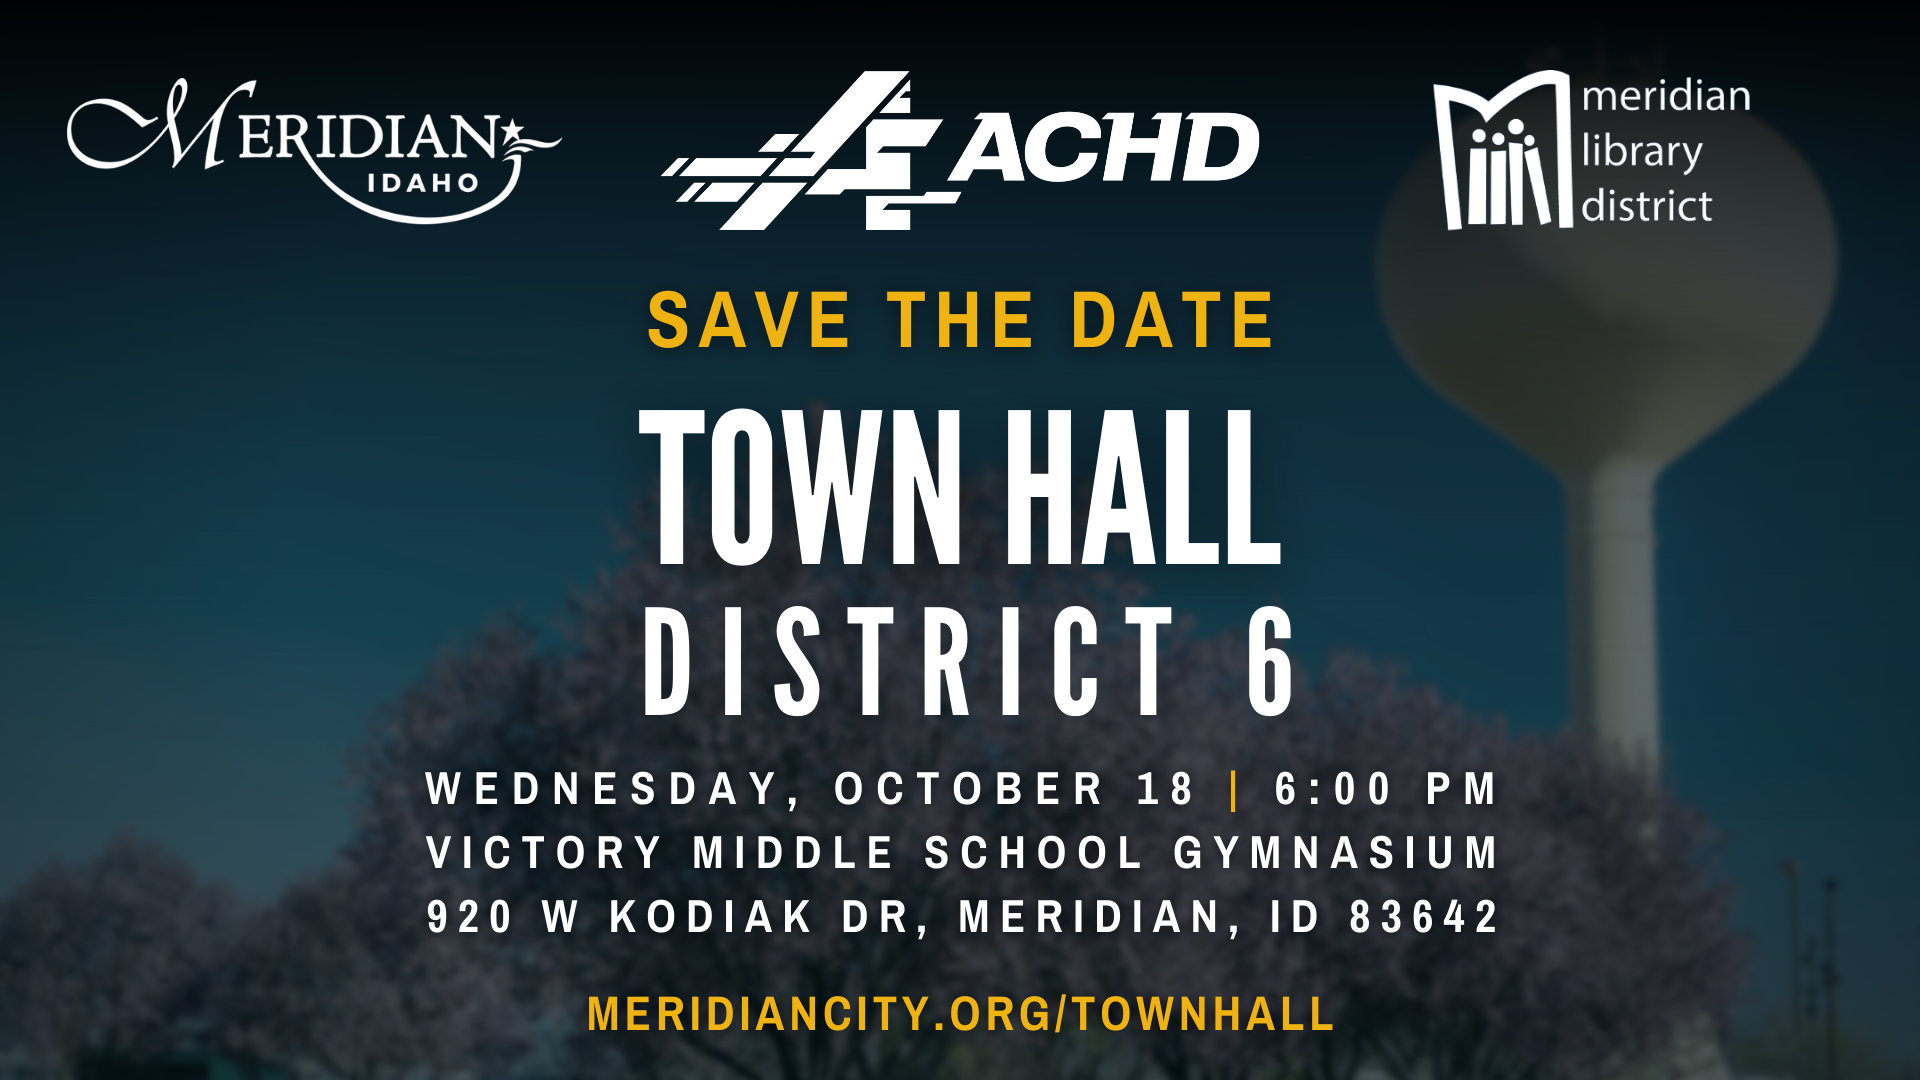 Graphic showcasing details for a Town Hall event. Top includes logos for involved agencies, which (from left to right) are: City of Meridian, Ada County Highway District, and Meridian Library District. Yellow text says "Save The Date" below the logos; underneath that, white text says "Town Hall", and below that white text says "District 6". Below that, details about time and place are included in white text: Wednesday, October 18, 6:00 PM, Victory Middle School Gymnasium, 920 W Kodiak Dr, Meridian, ID 83642. At the bottom of the graphic, in yellow text, is a website: meridiancity.org/townhall.